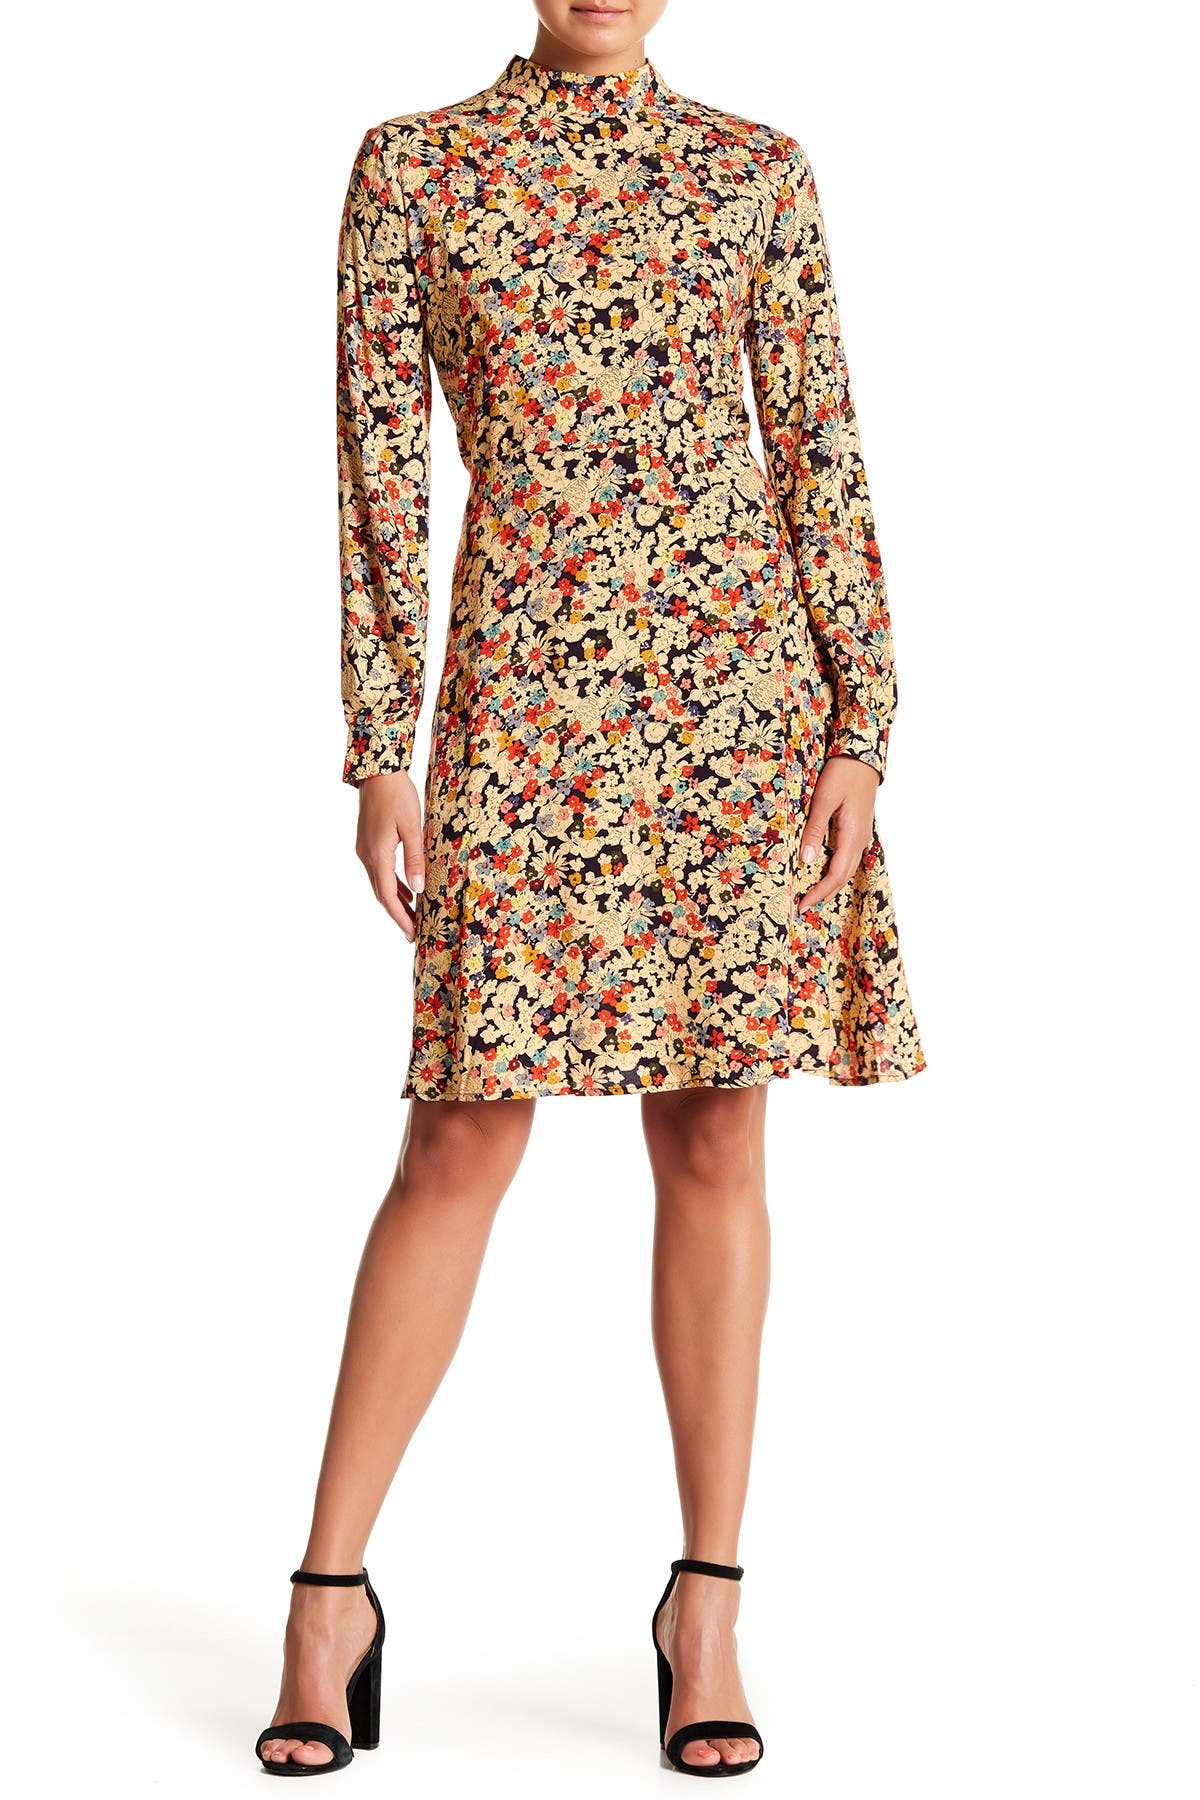 chelsea and theodore floral dress